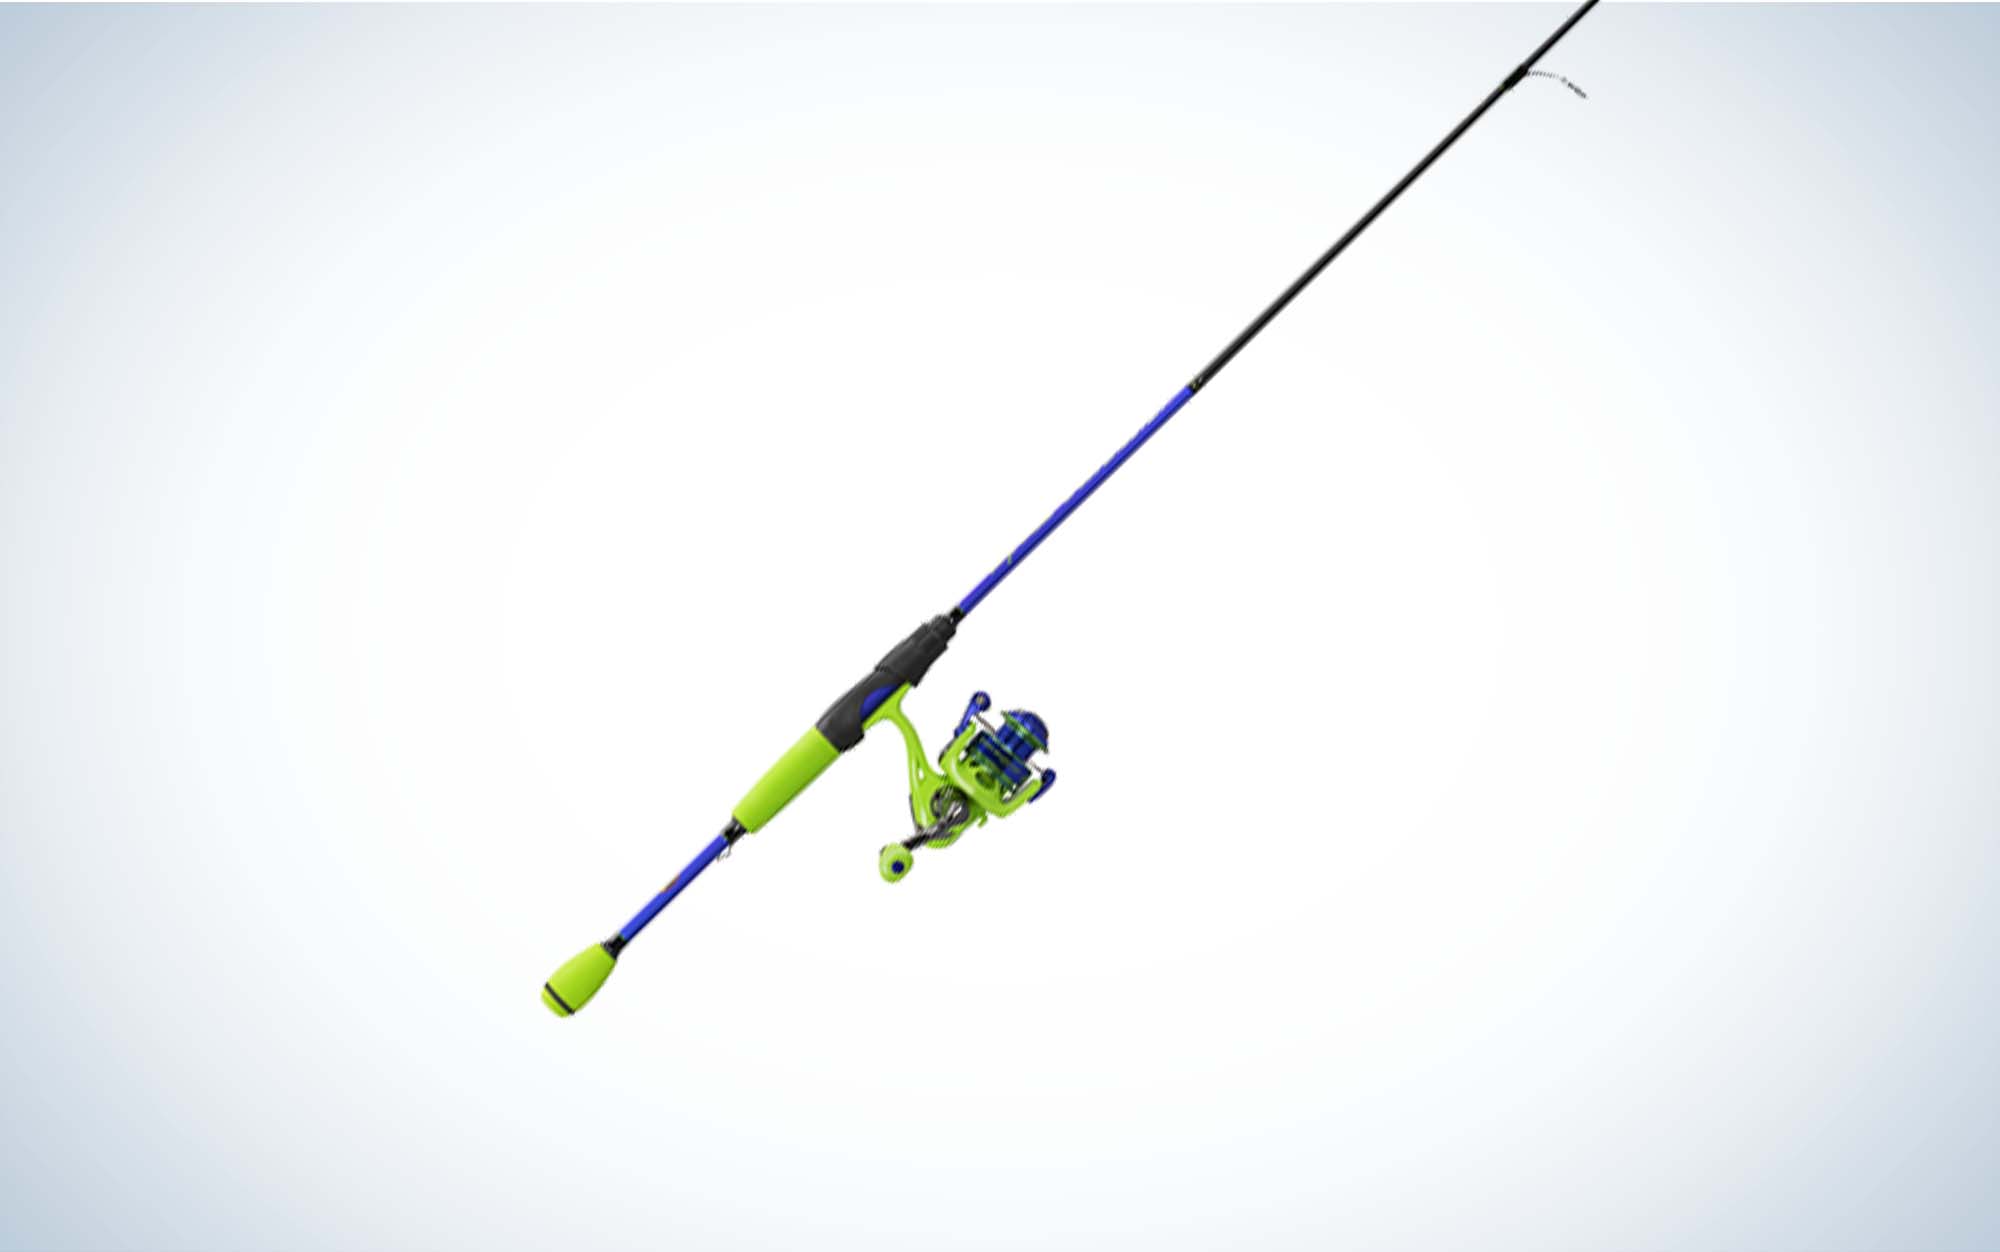 The Lew's Wally Marshall Speed Shooter is the best crappie rod for dock shooting.